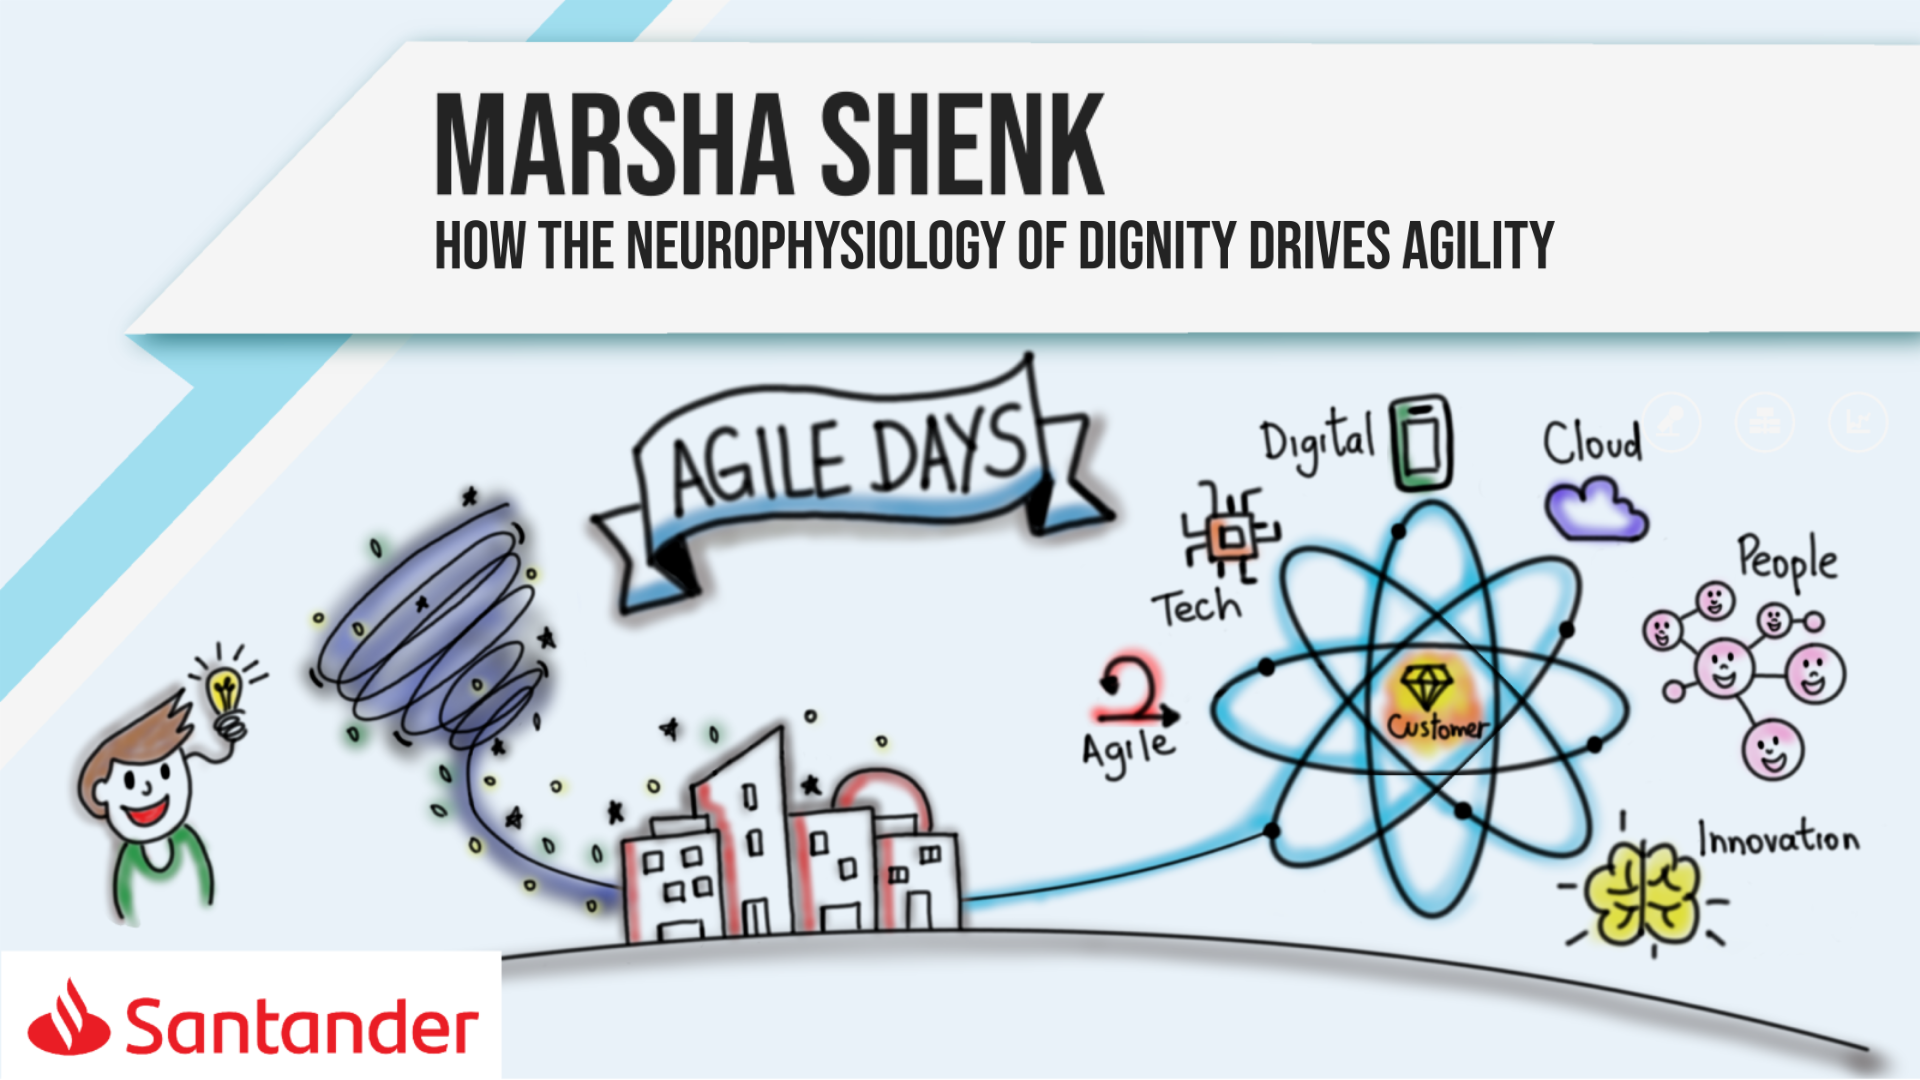 How the Neurophysiology of Dignity drives Agility